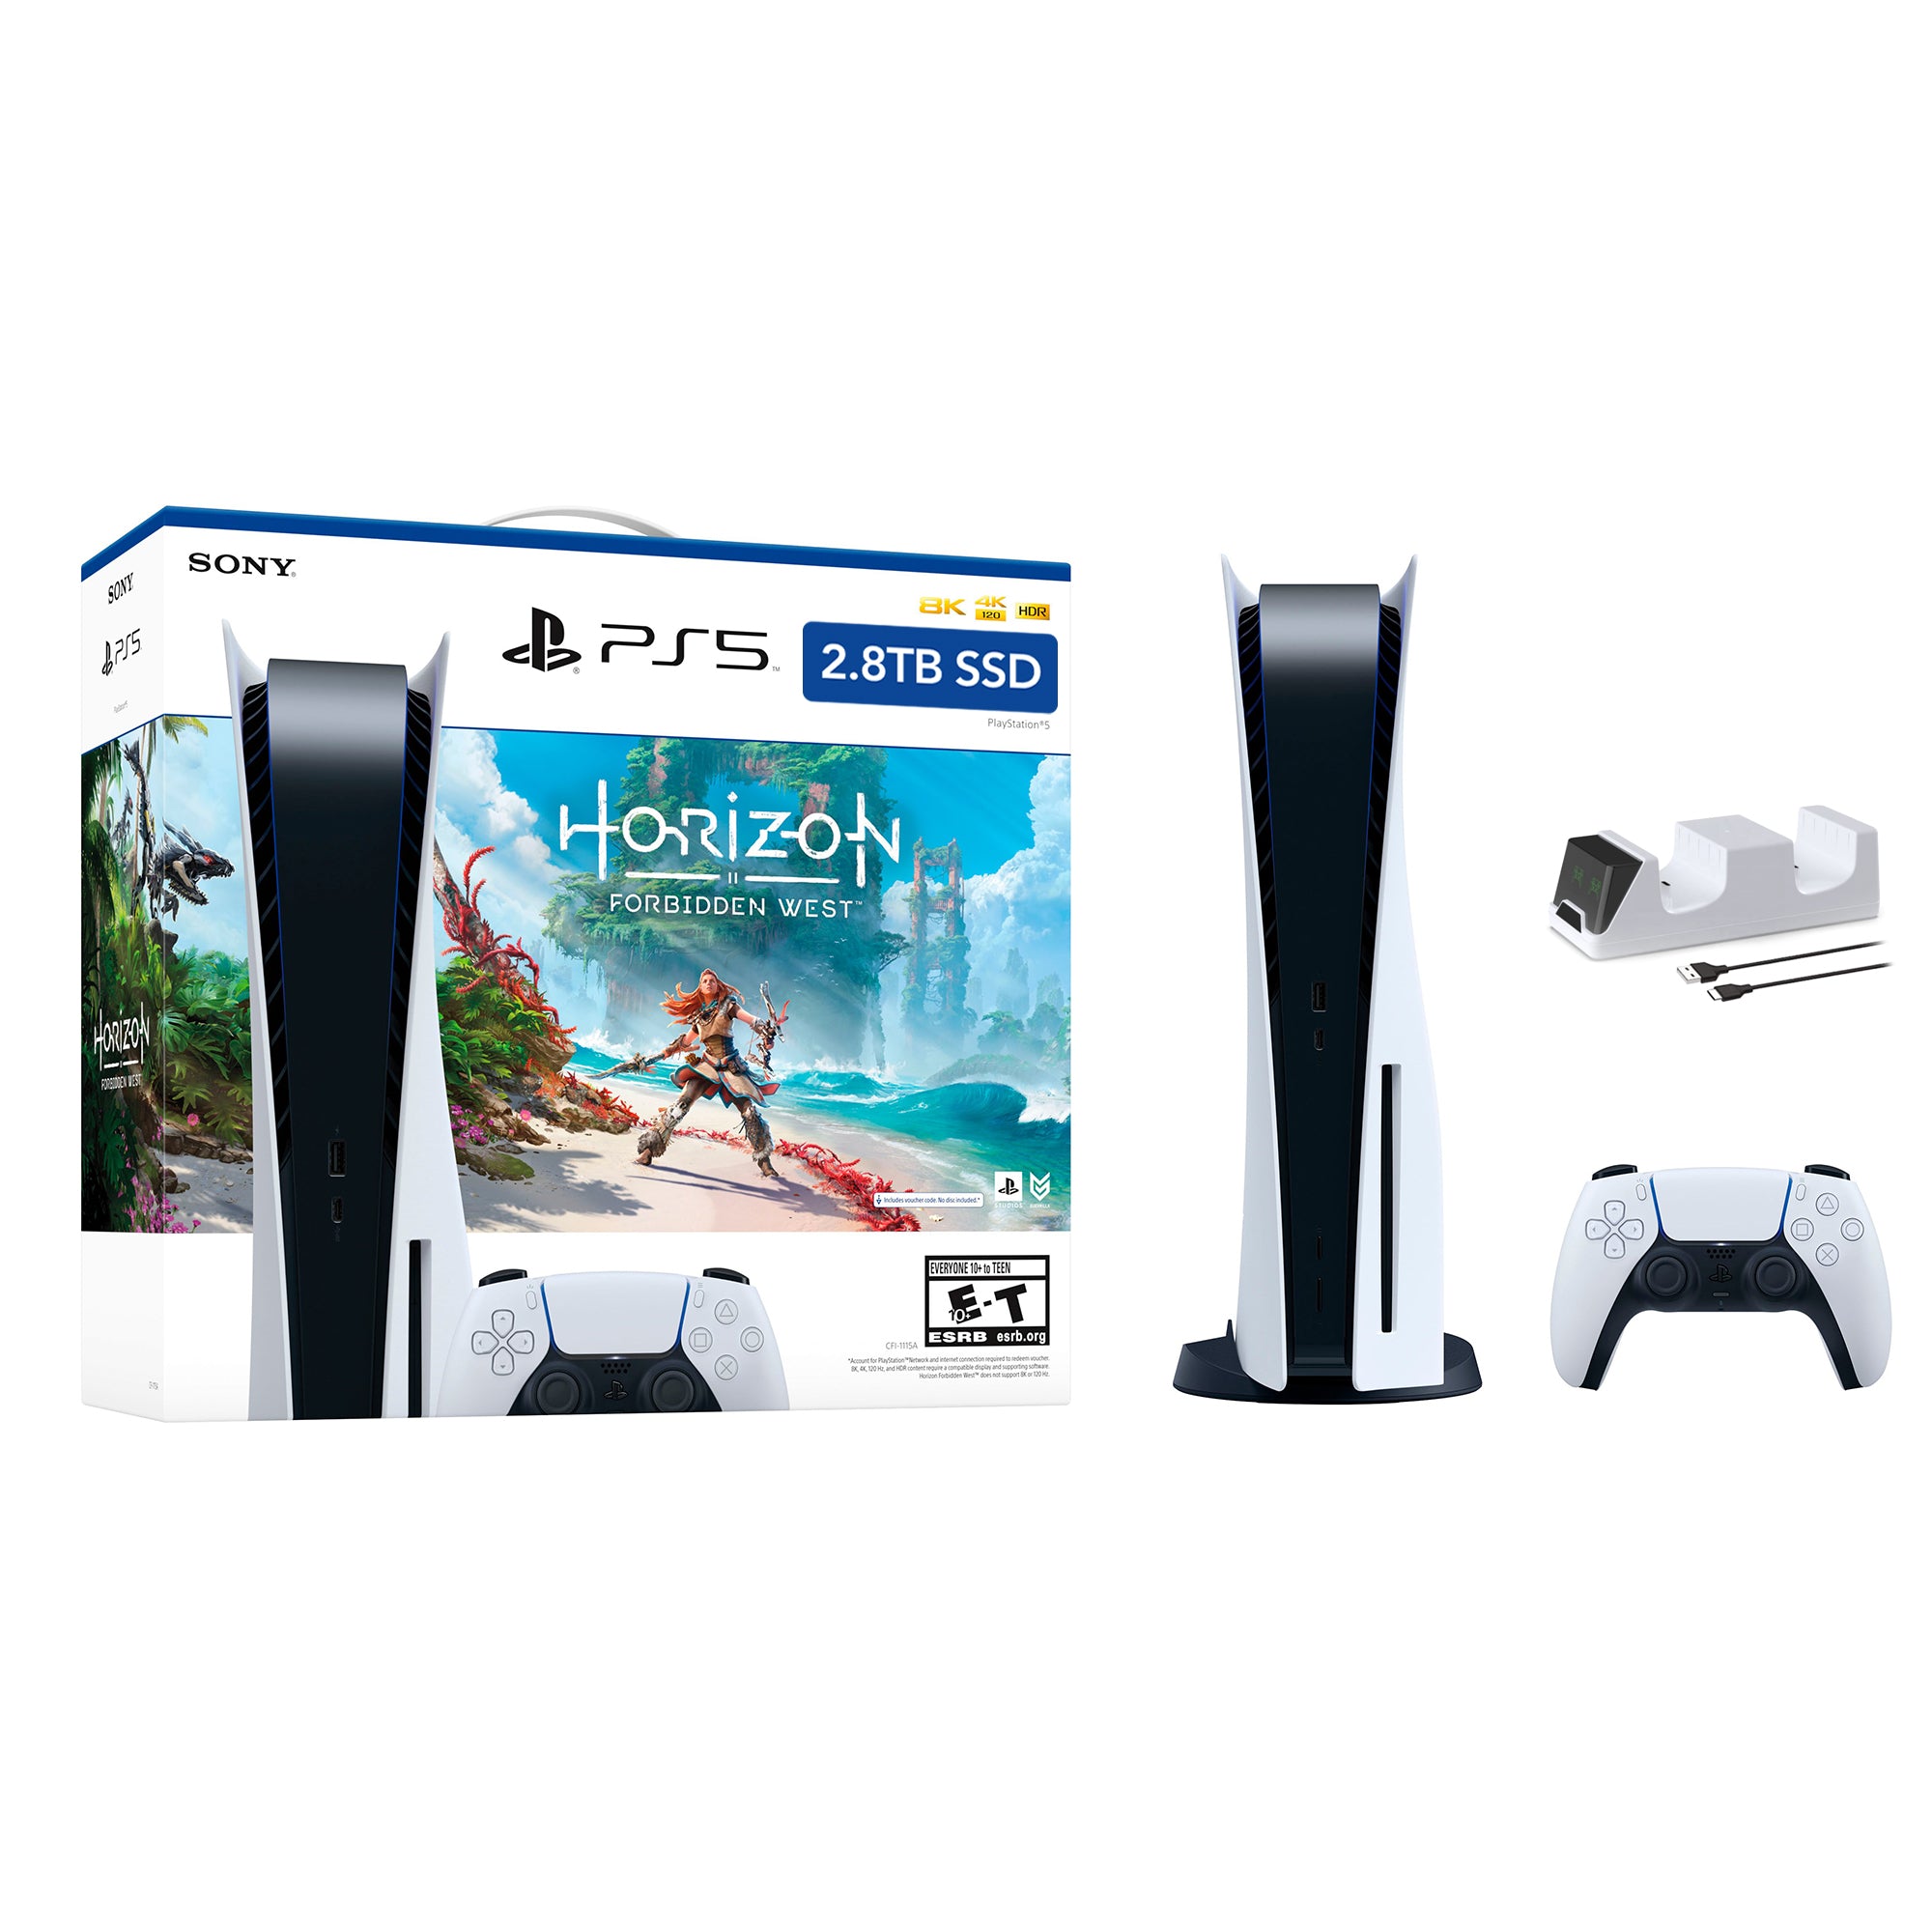 PlayStation 5 Upgraded 2.8TB Disc Edition Horizon Forbidden West Bundle and Mytrix Controller Charger - White, PS5 Gaming Console